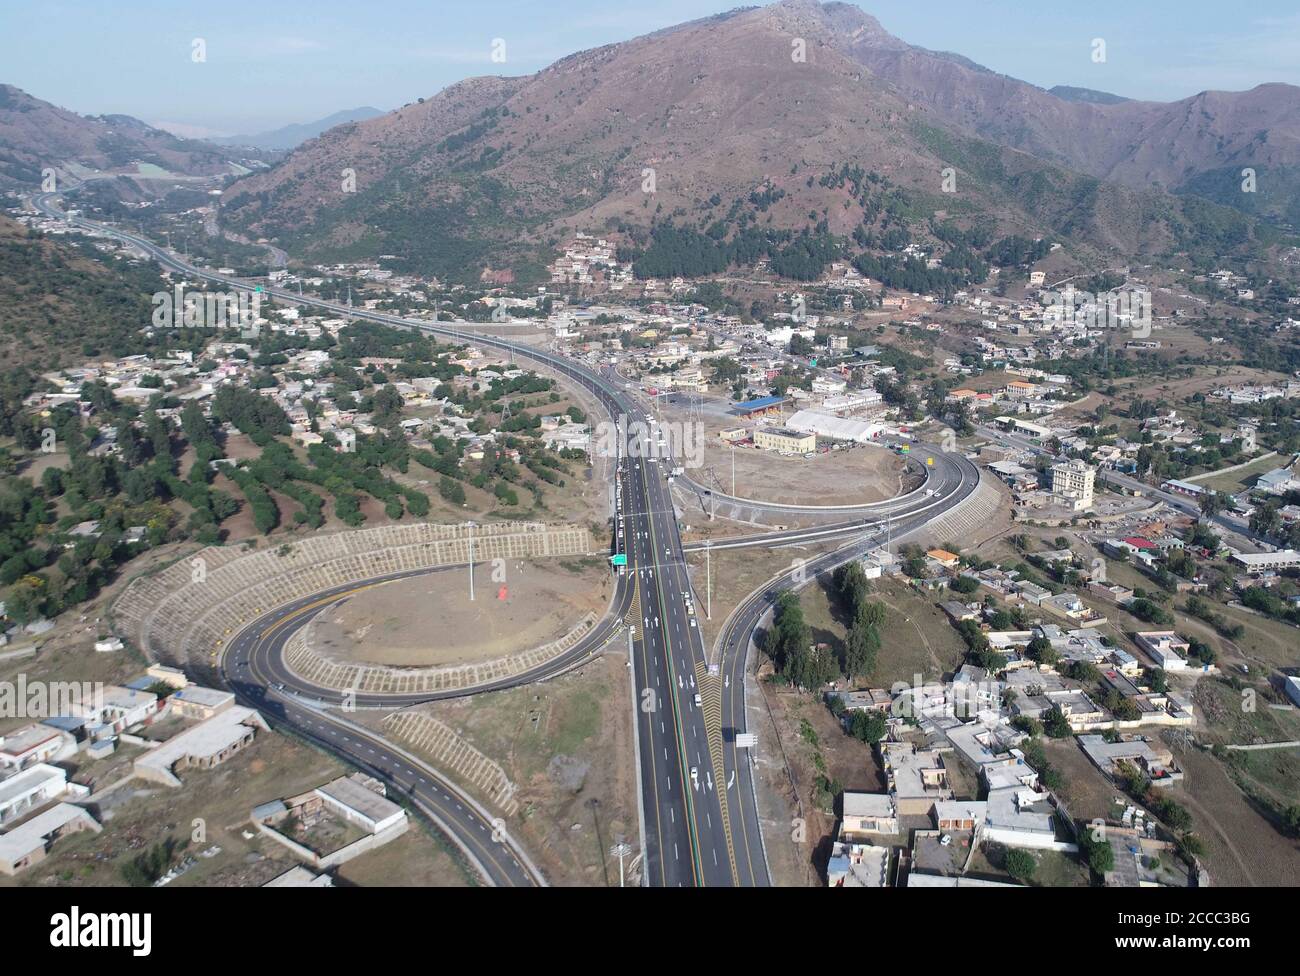 Islamabad. 21st Aug, 2020. Photo taken on Nov. 18, 2019 shows the expressway section from Havelian to Mansehra under the Karakoram Highway (KKH) Phase Two project in Pakistan's northwest Khyber Pakhtunkhwa province. TO GO WITH XINHUA HEADLINES OF AUG. 21, 2020. Credit: Liu Tian/Xinhua/Alamy Live News Stock Photo